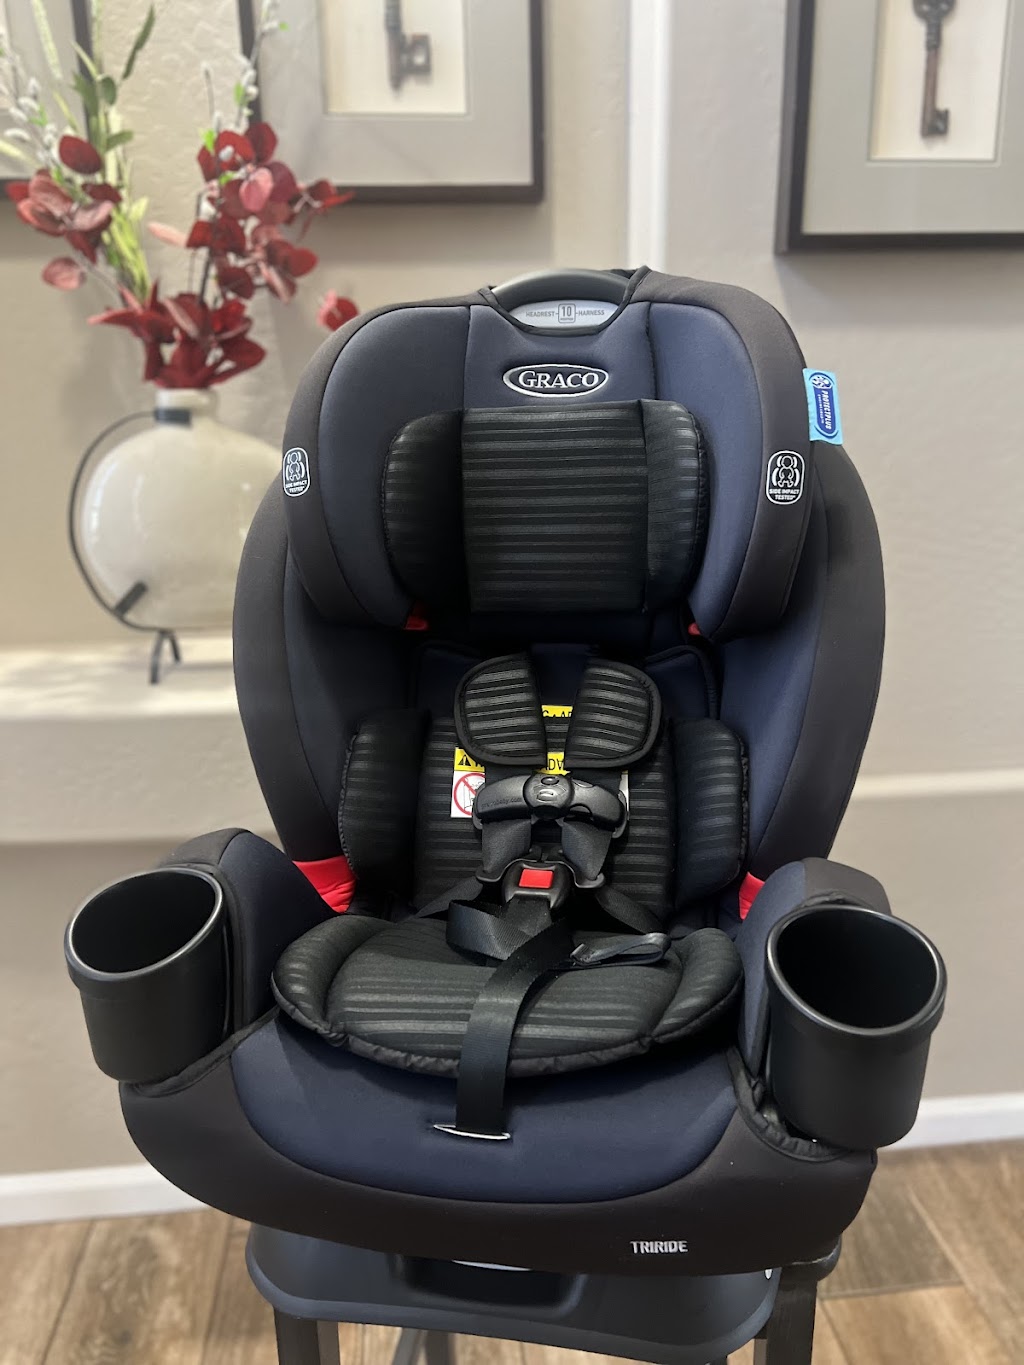 BabyQuip Baby Gear Rentals, Mary Norby | 11328 N 150th Ln, Surprise, AZ 85379, USA | Phone: (623) 201-4289